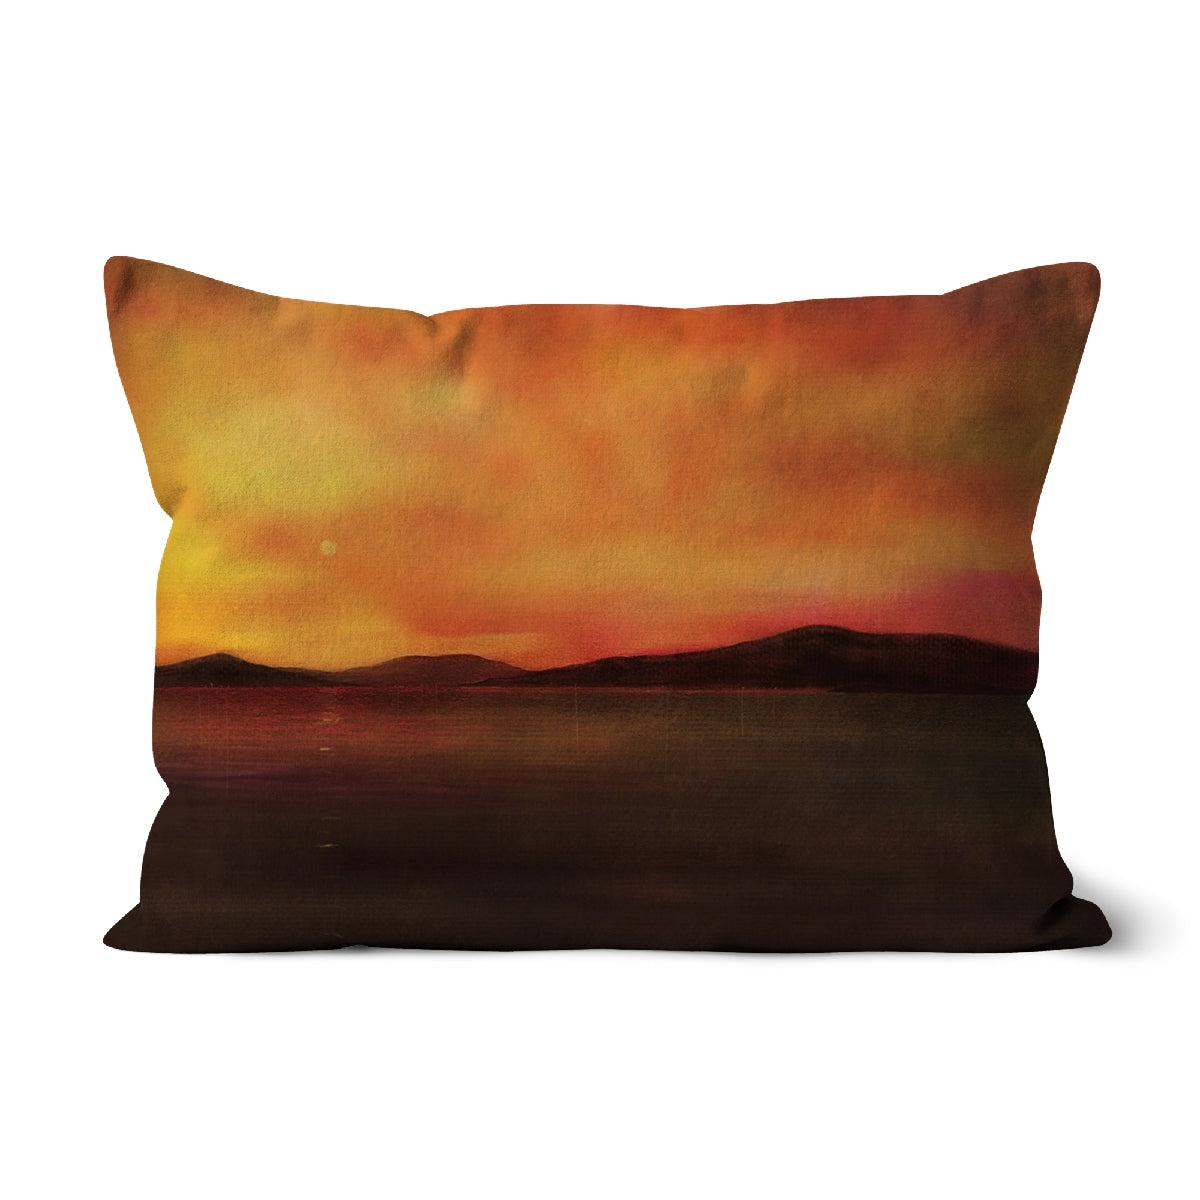 Harris Sunset Art Gifts Cushion-Cushions-Hebridean Islands Art Gallery-Canvas-19"x13"-Paintings, Prints, Homeware, Art Gifts From Scotland By Scottish Artist Kevin Hunter